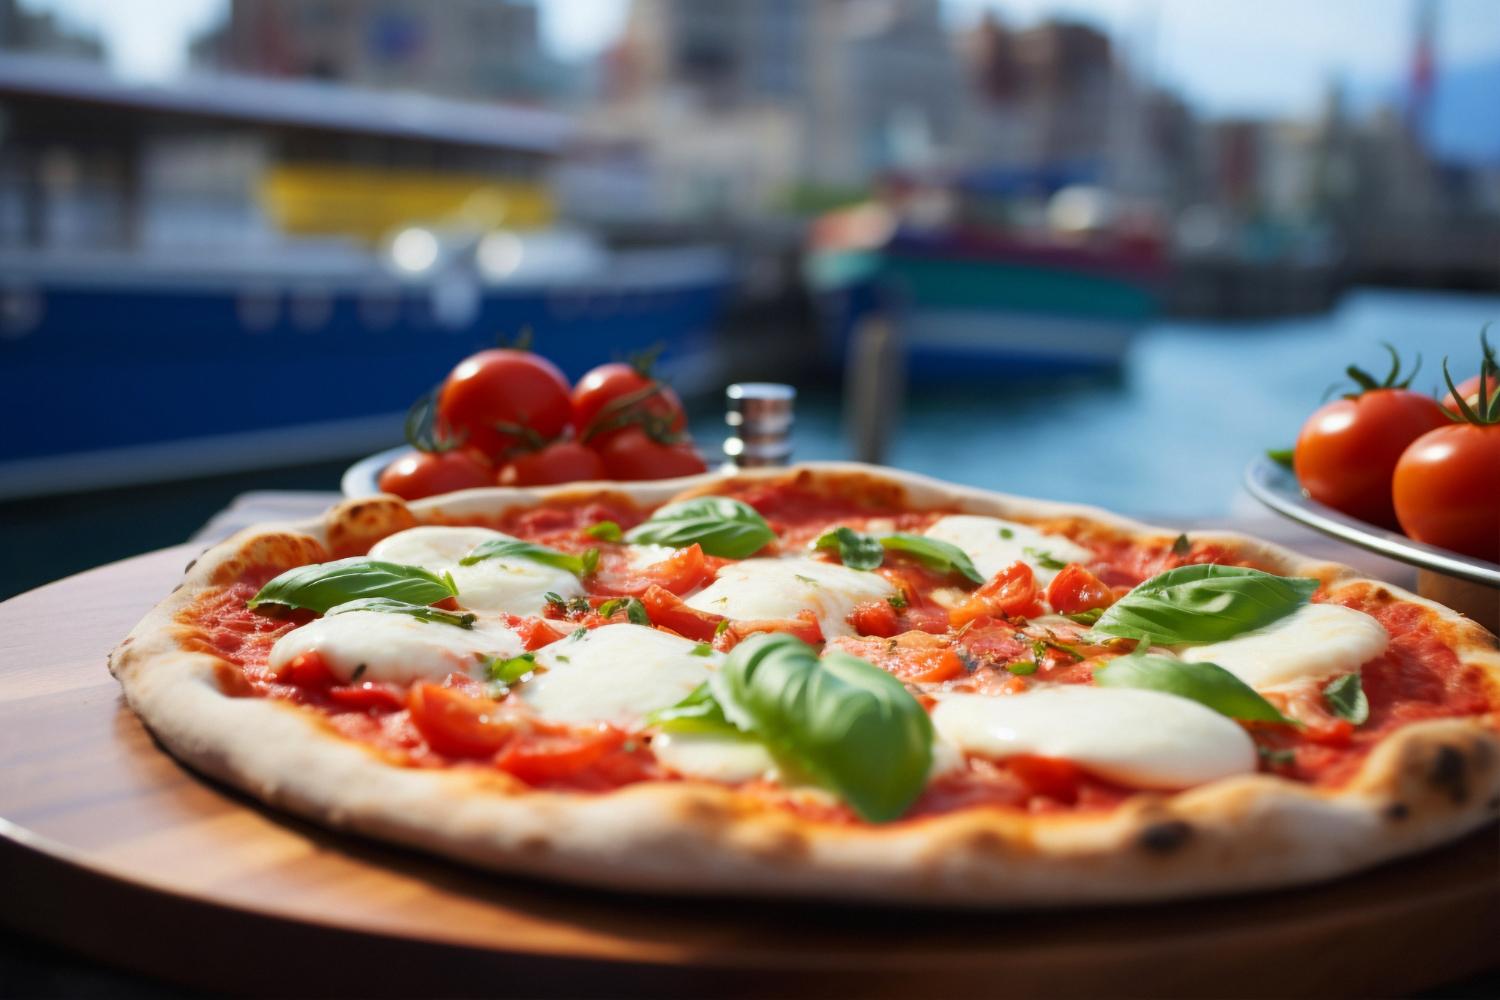 Imagine the Freshness and Bursting Flavours of this Traditional Italian Pizza